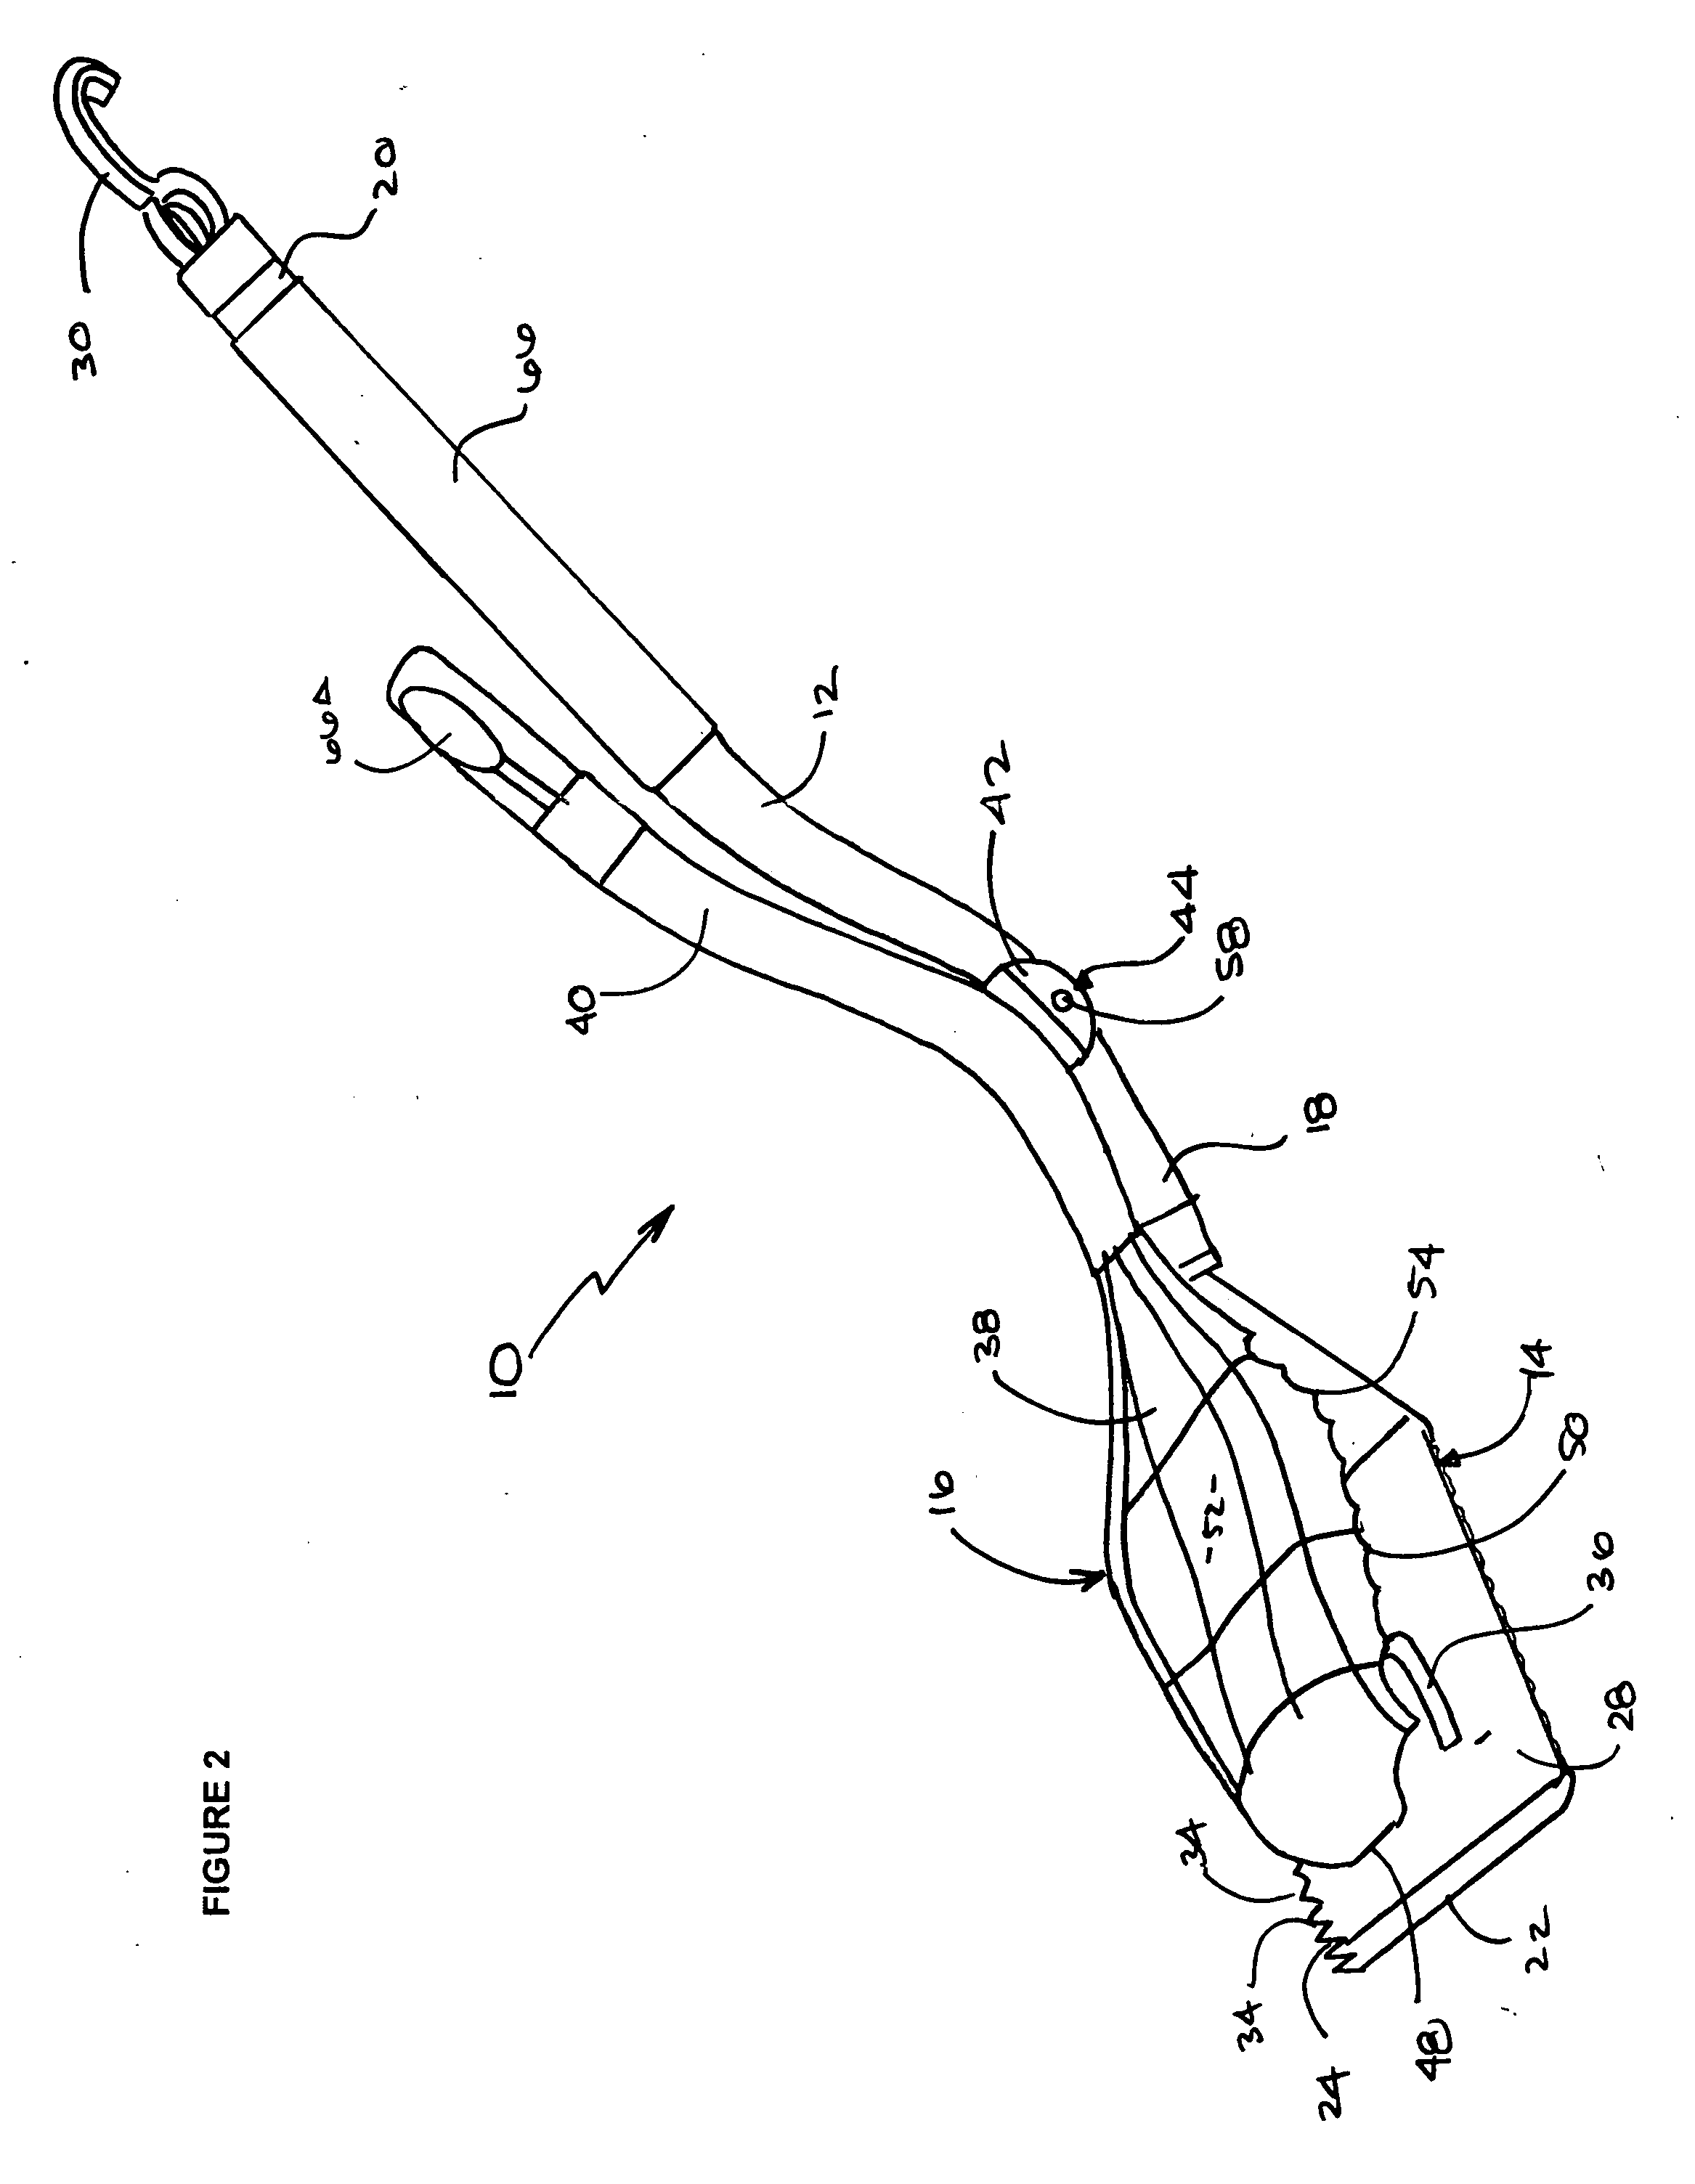 Combination spatula and tong device for handling food